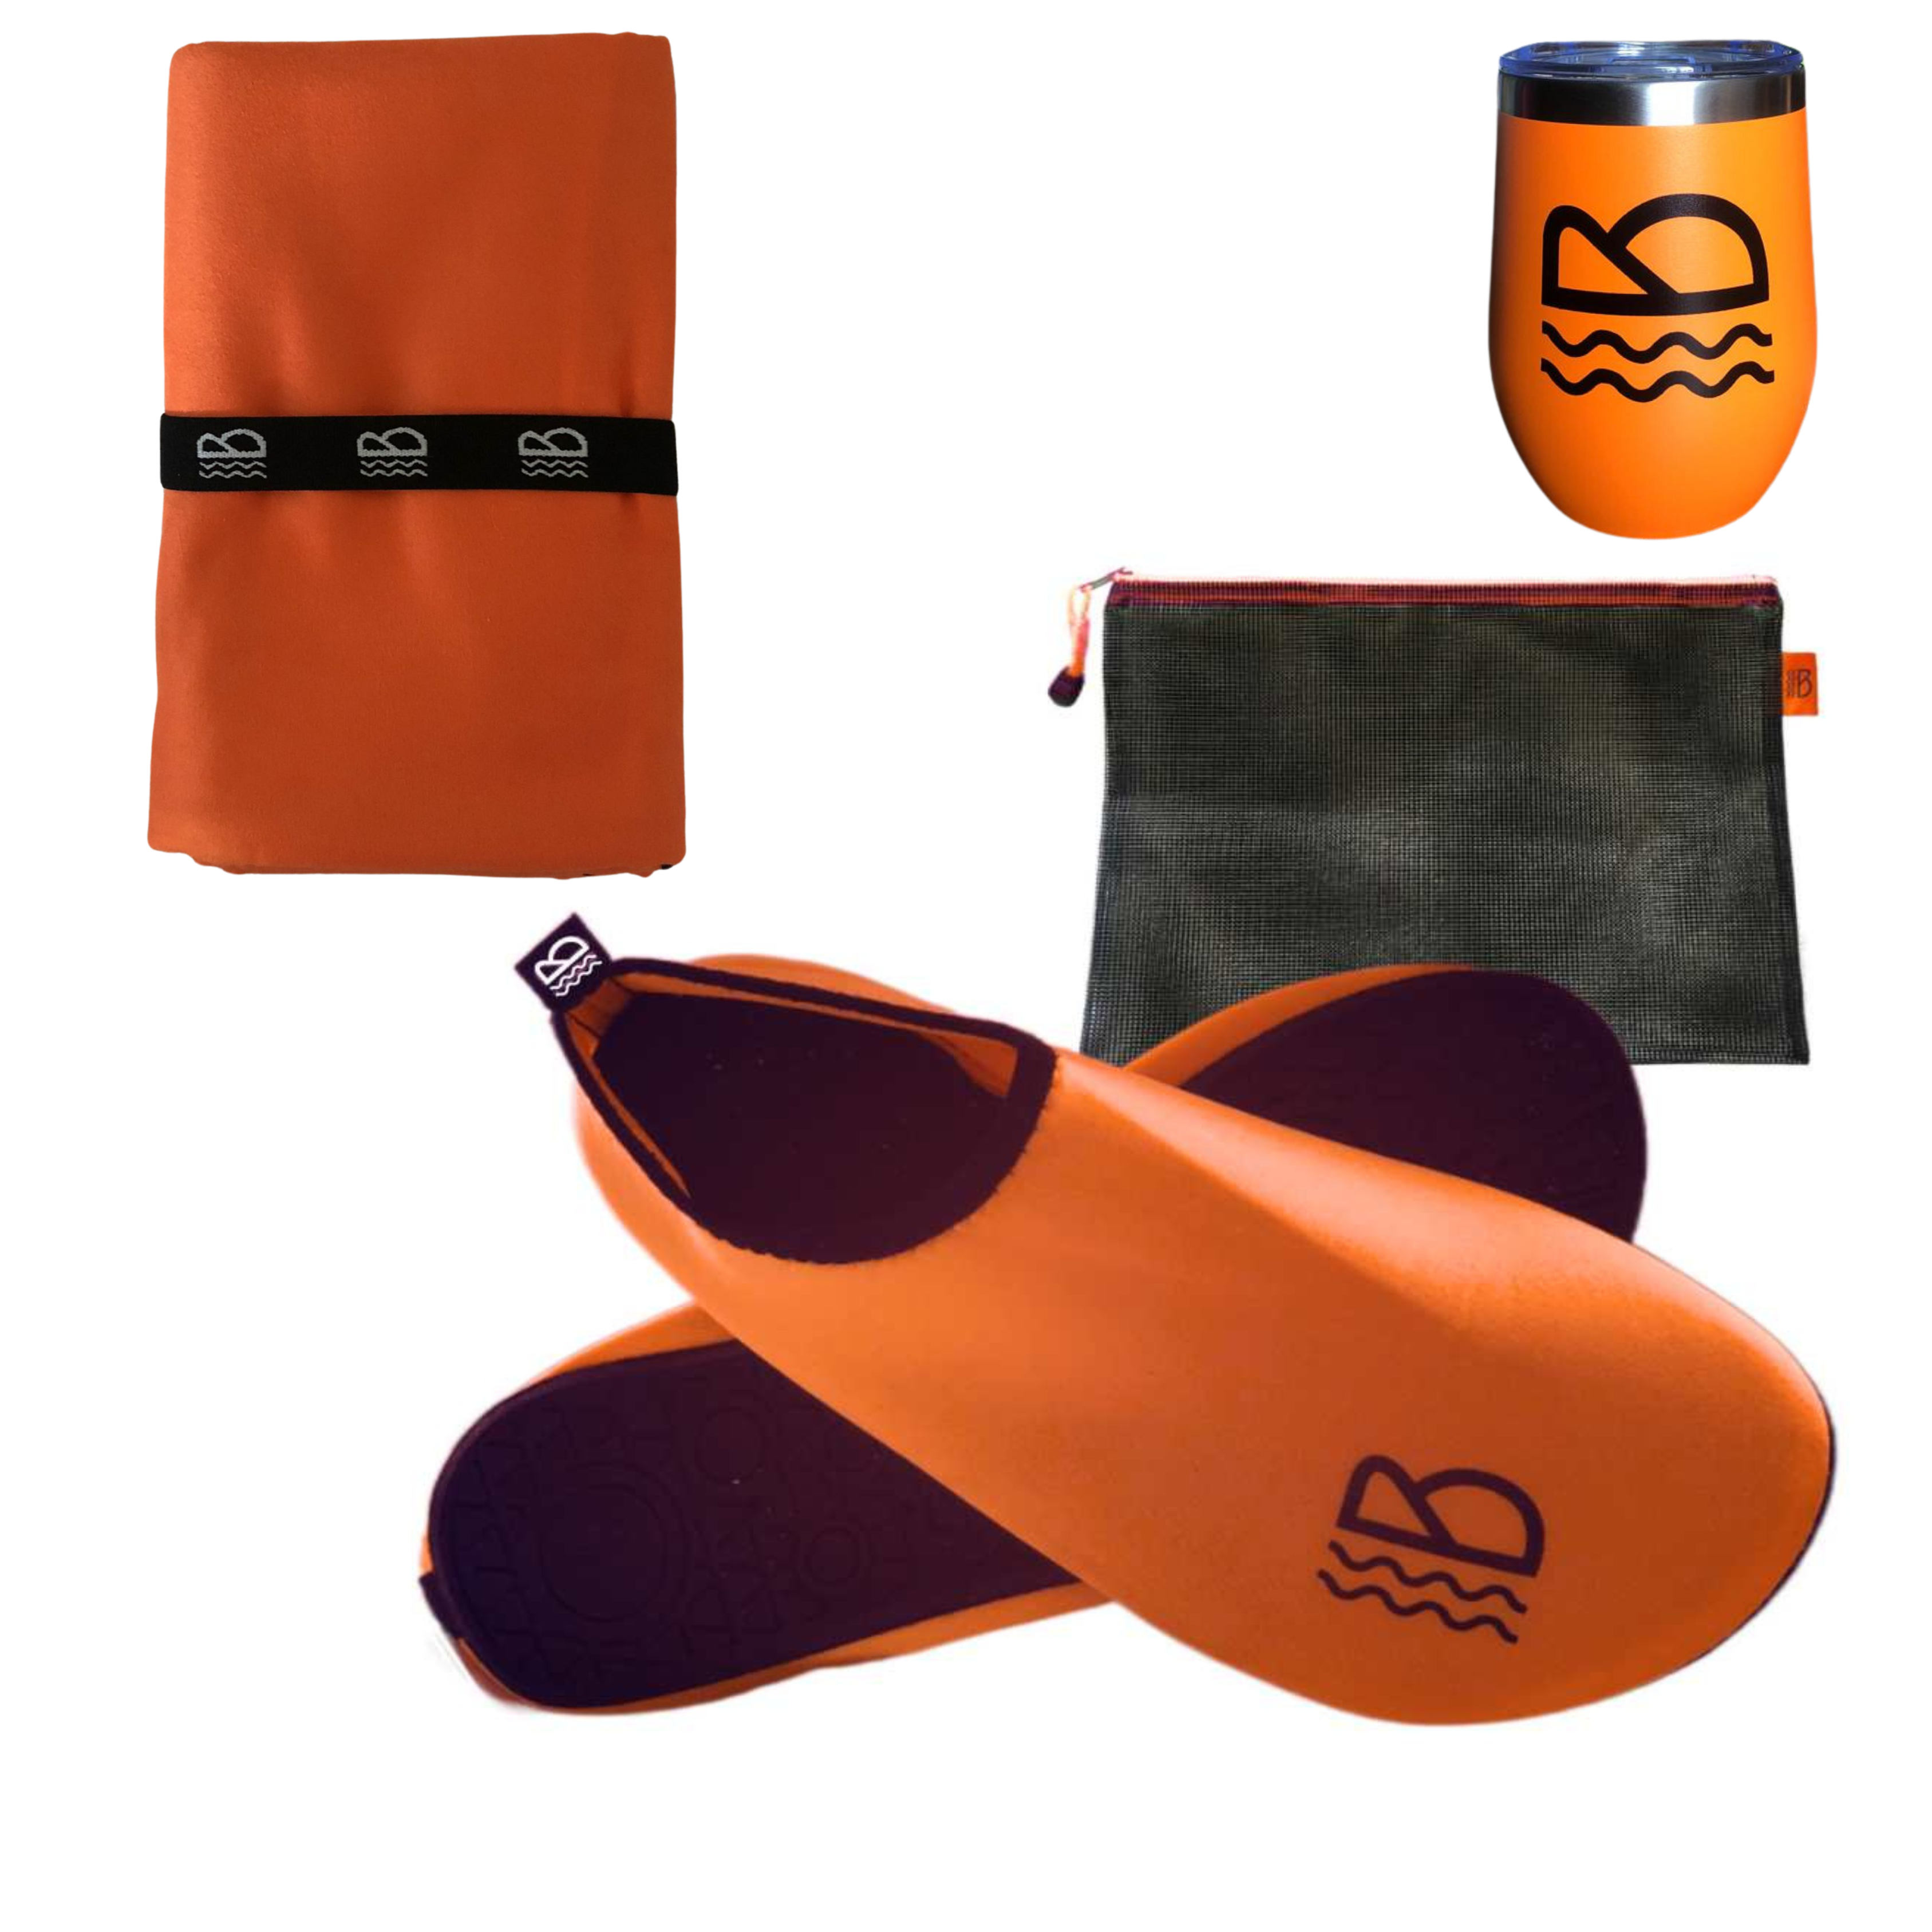 Shoes & Towel & Cup Beach Pack